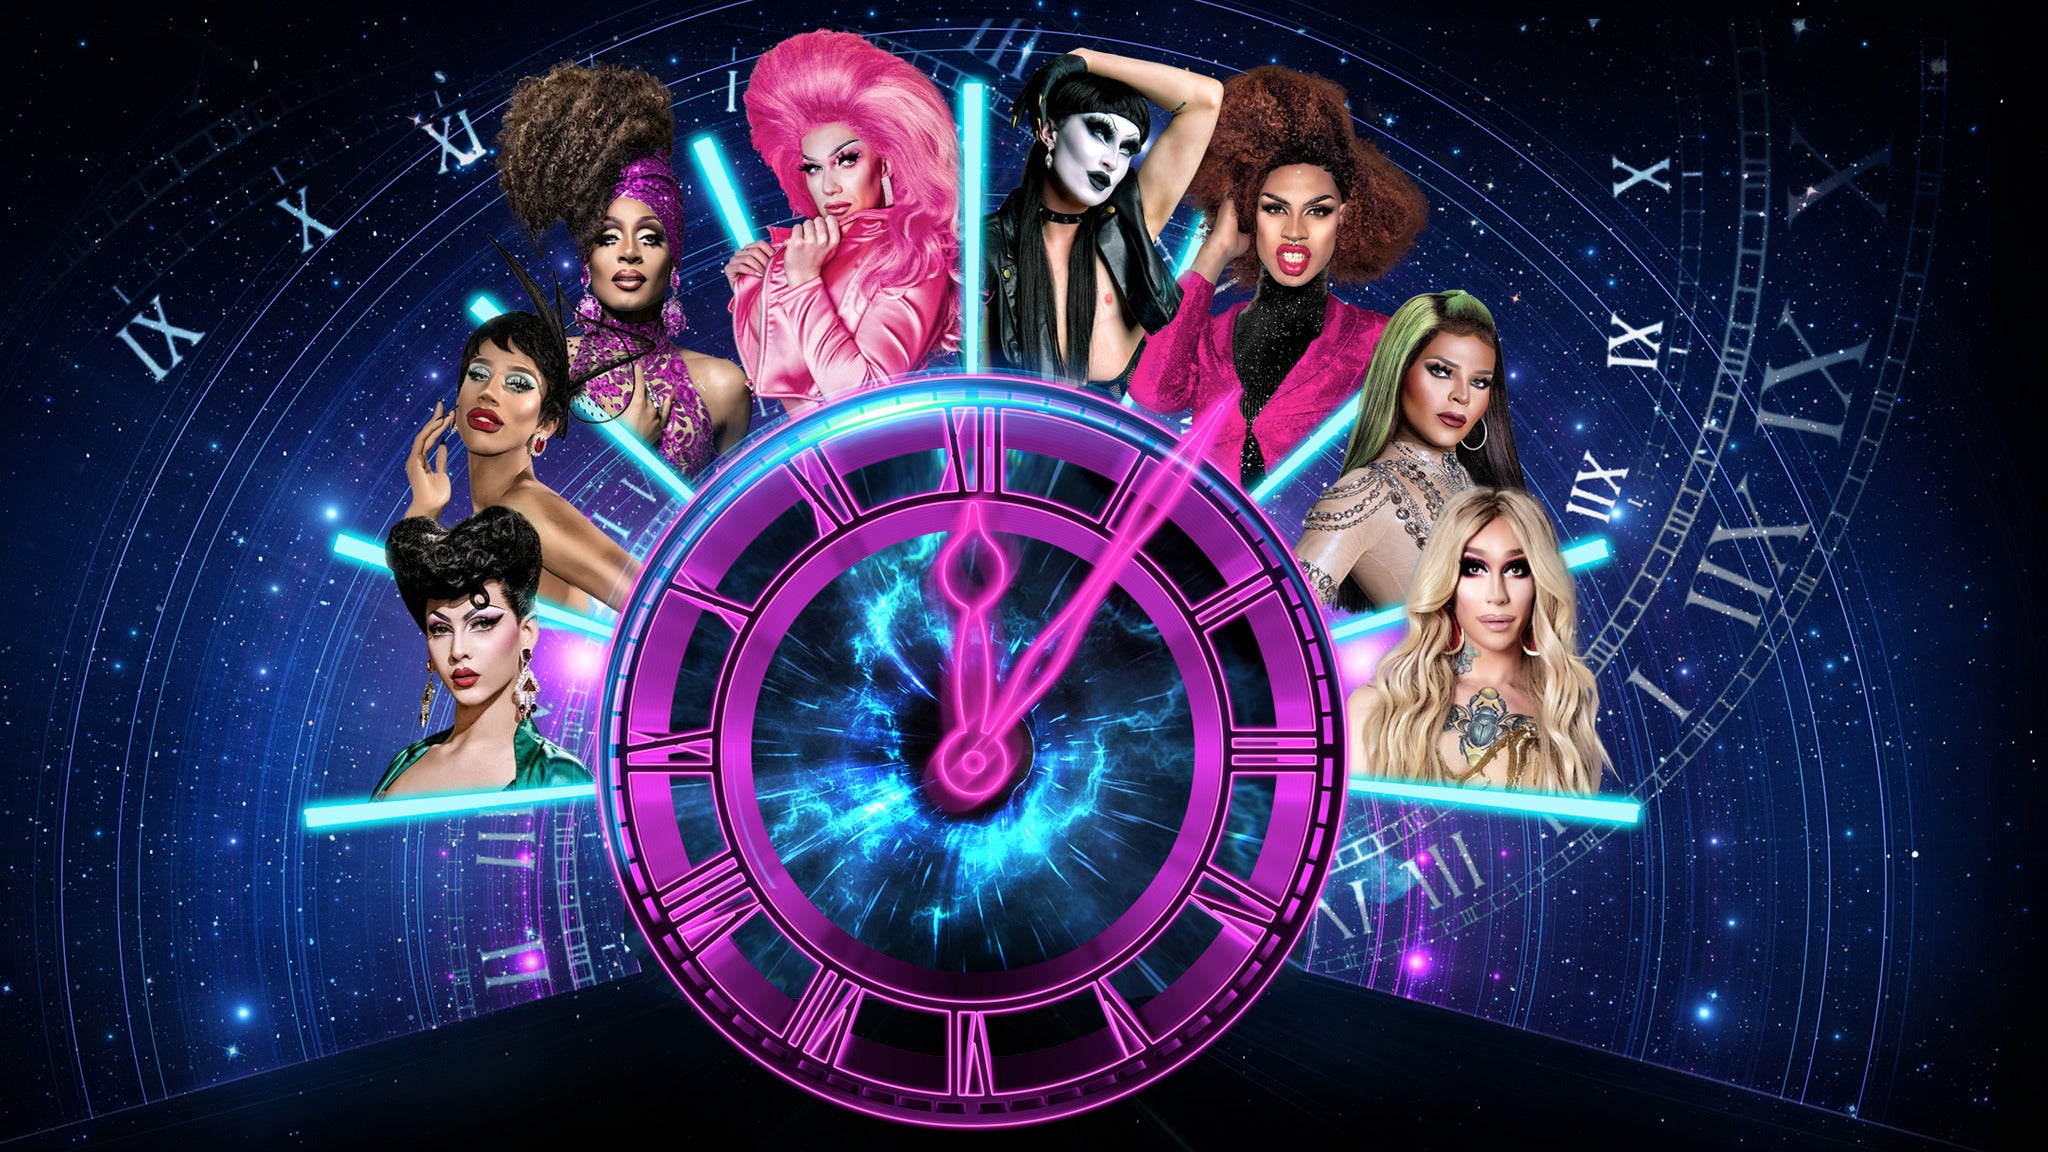 Rupaul's Drag Race Werq The World Tour 2022 presale code for early tickets in Edmonton